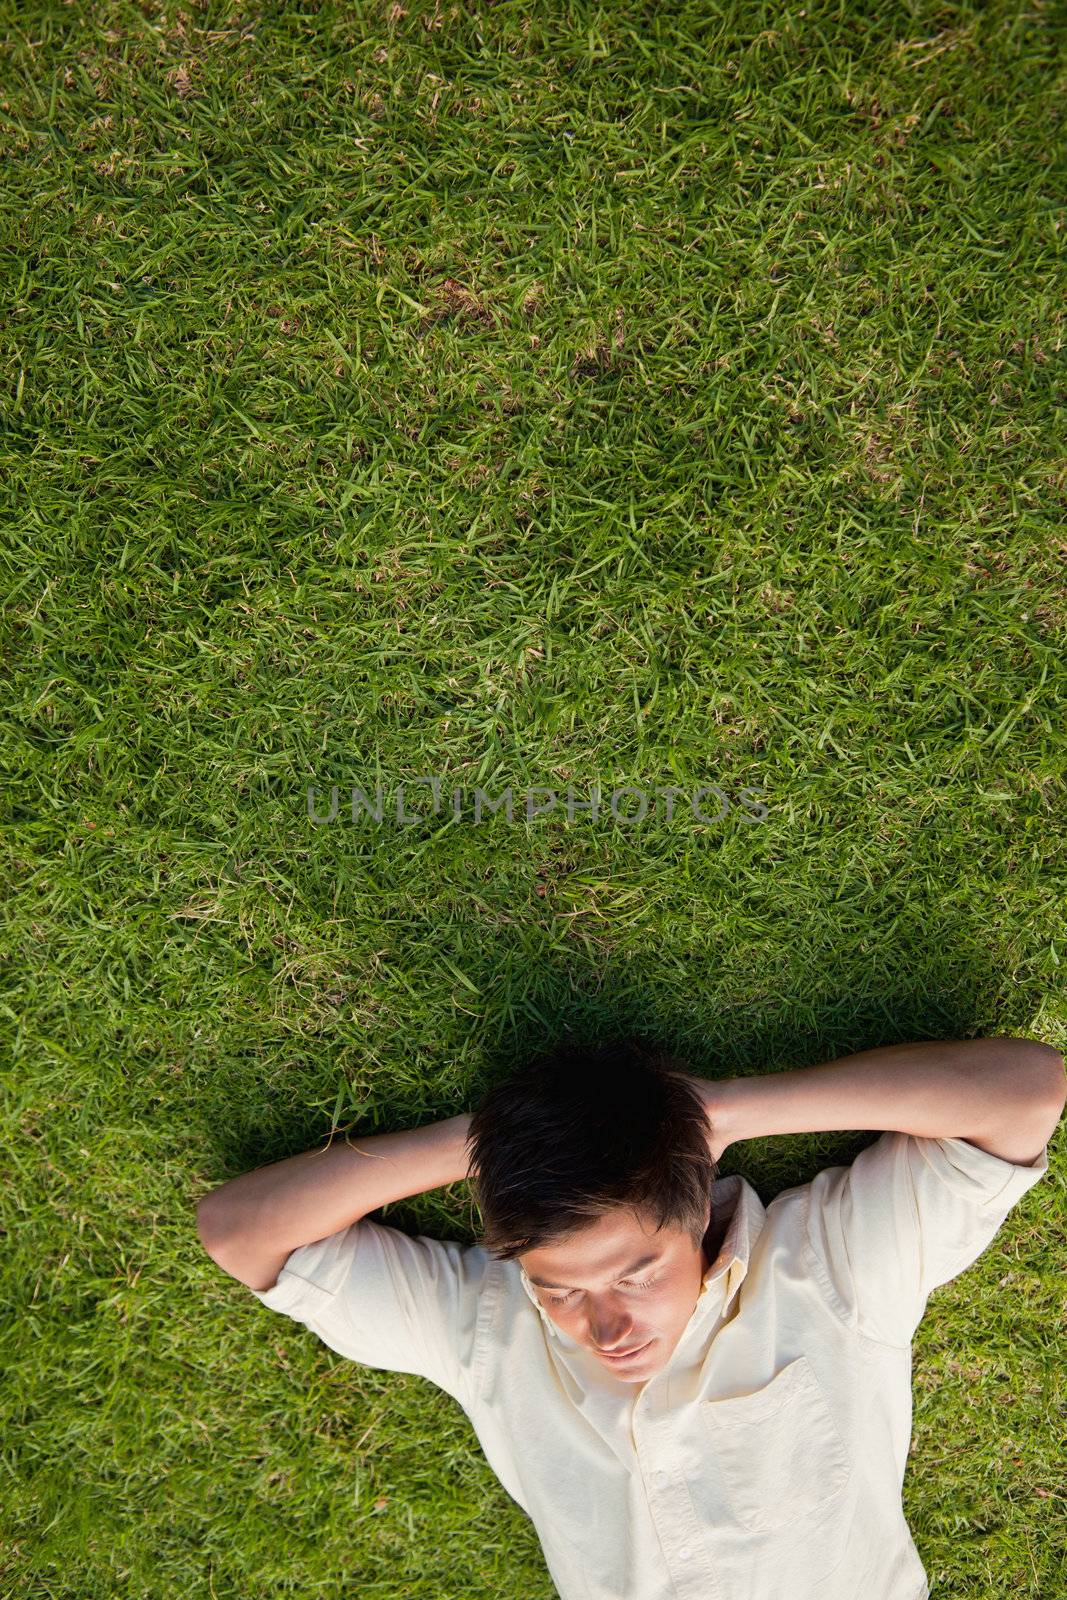 Elevated view of a man lying in grass with his eyes closed and his hands resting underneath his head